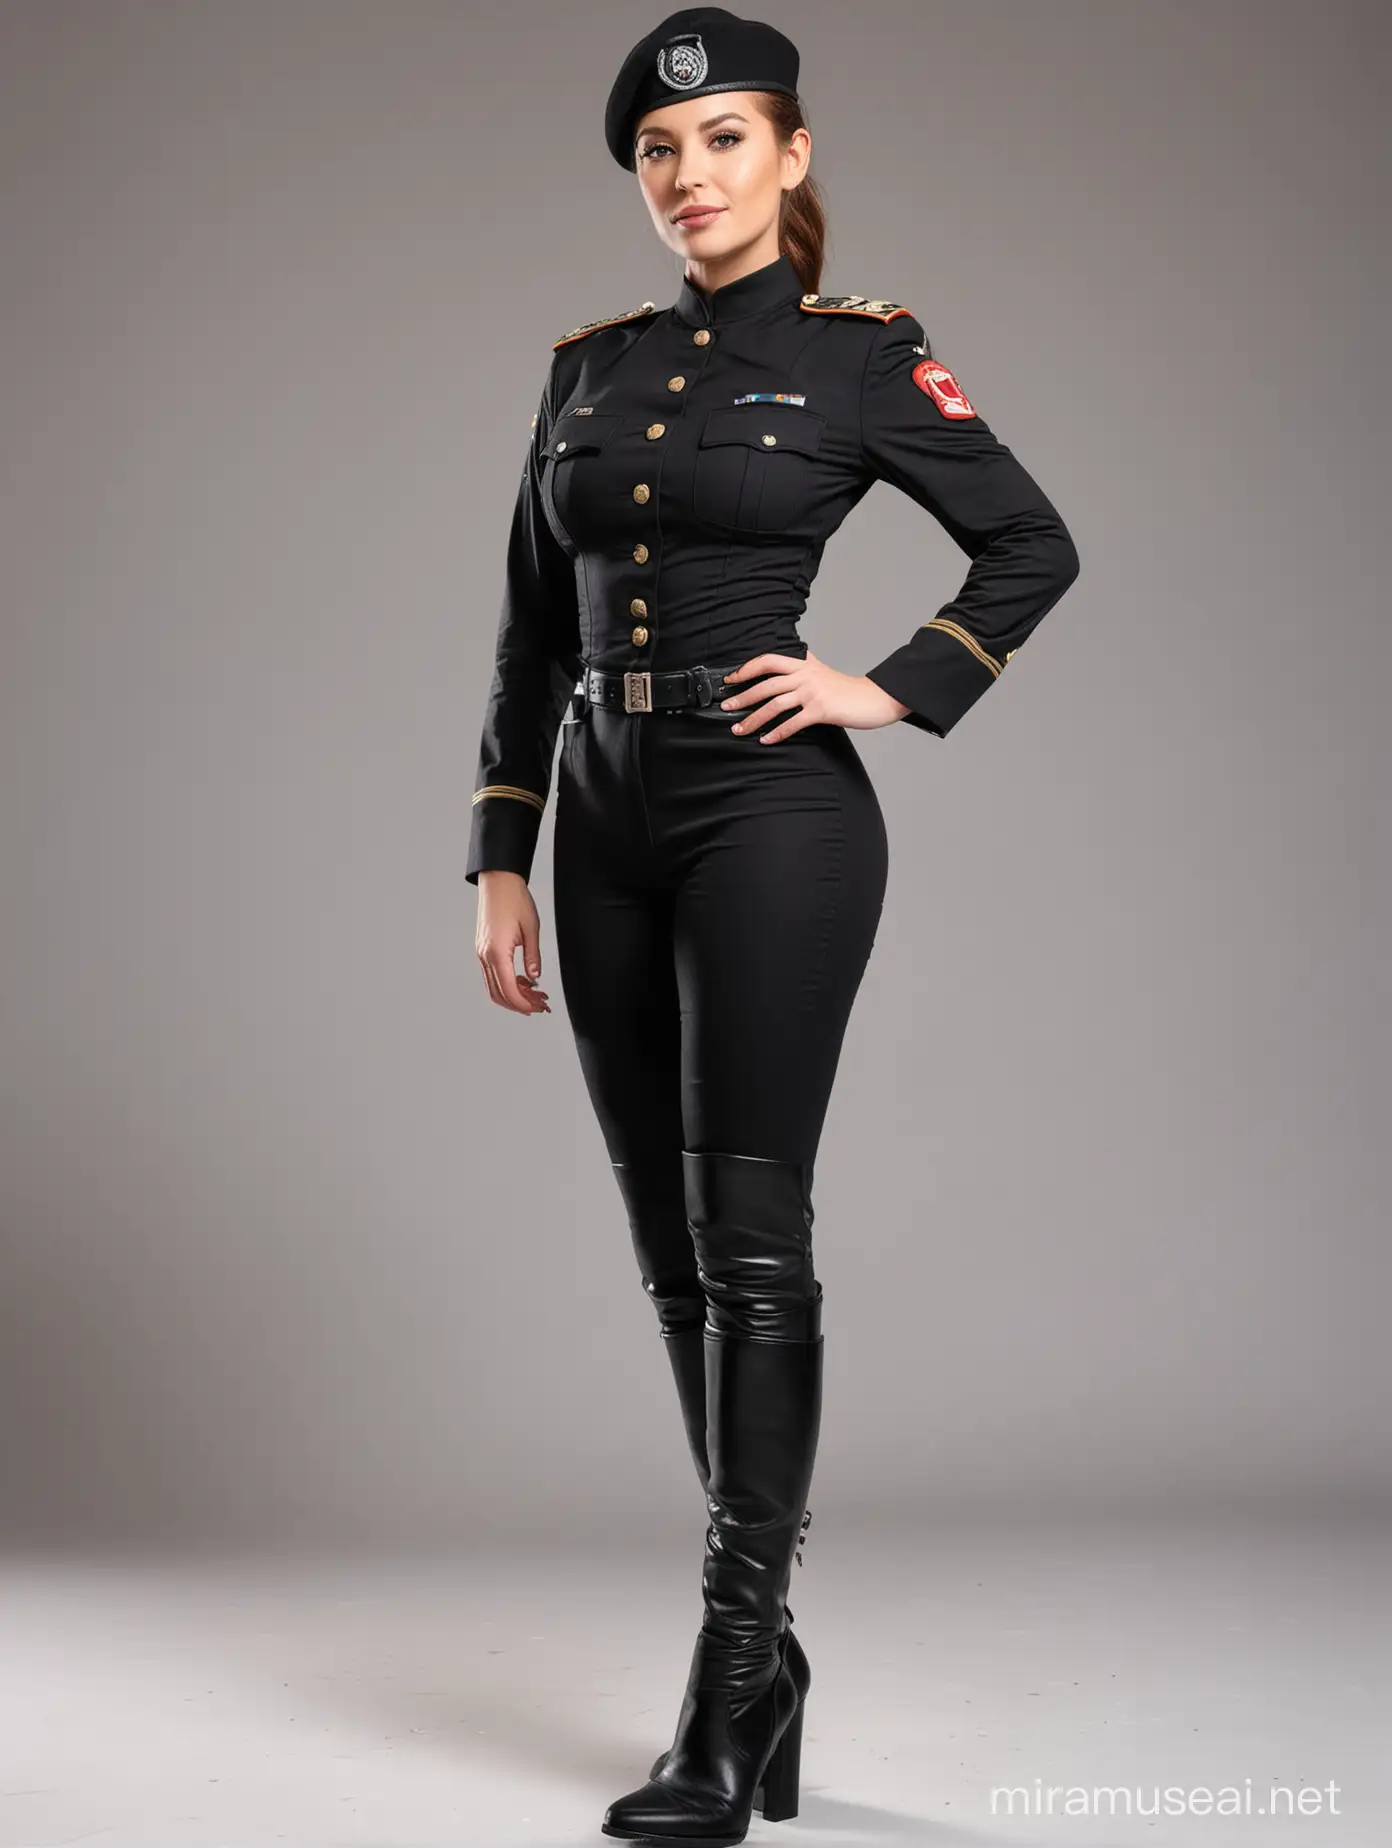 woman 30 years in BLACK MILITARY uniform, fit BODY,  STANDING FULL BODY FROM HEAD TO TOE big breast LONG LEGS LONG BOOTS